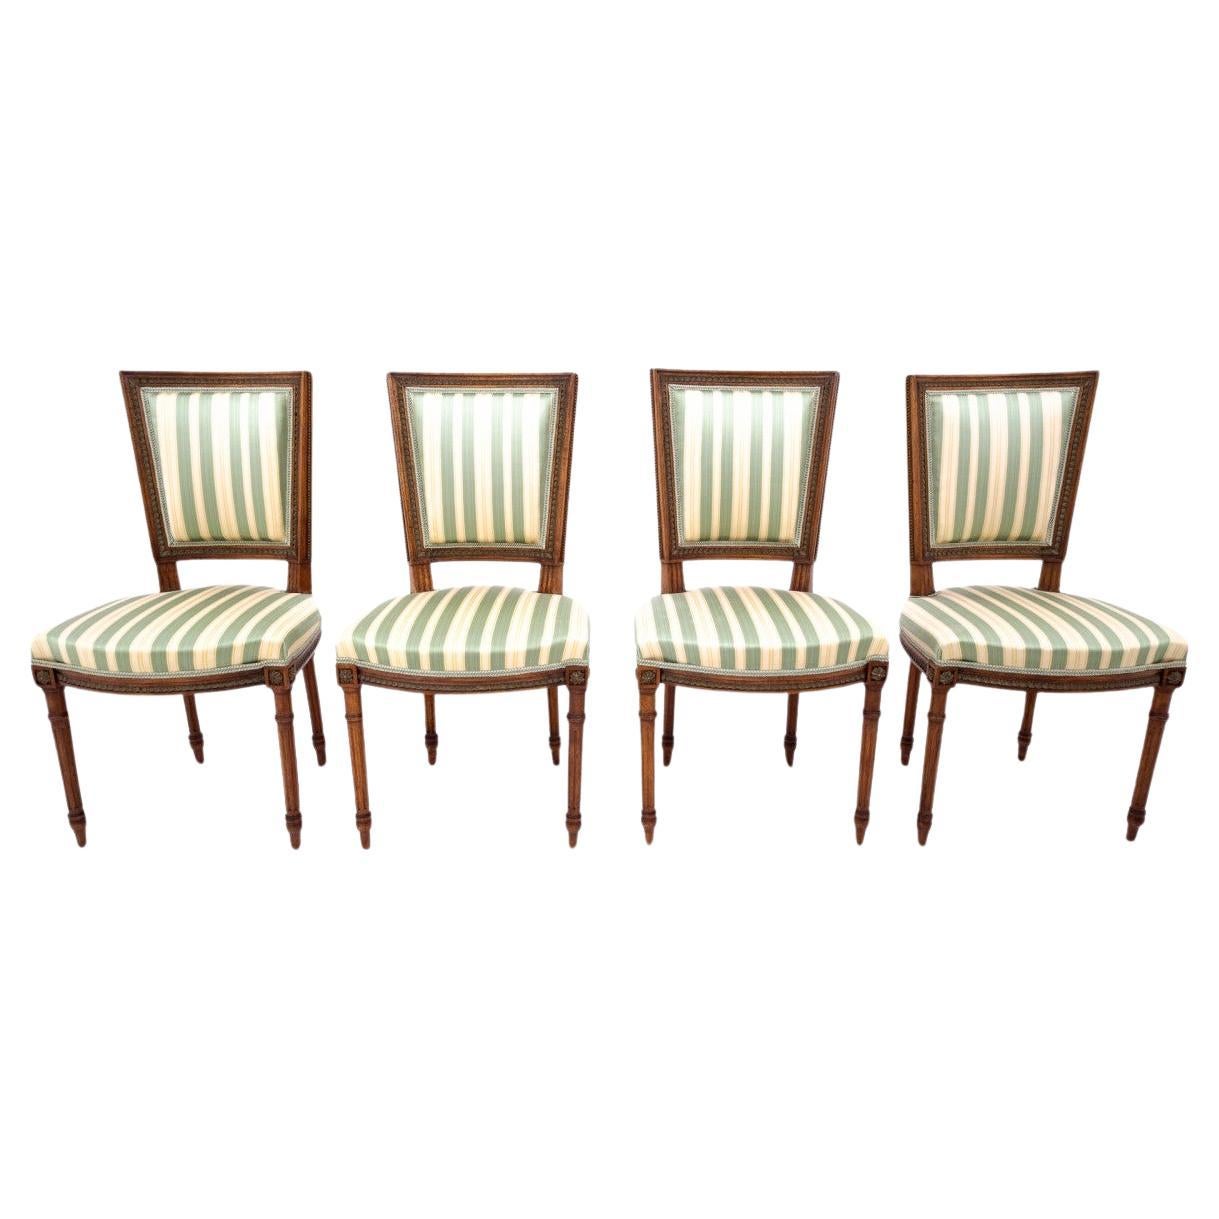 Set of 4 chairs, Sweden, circa 1870.